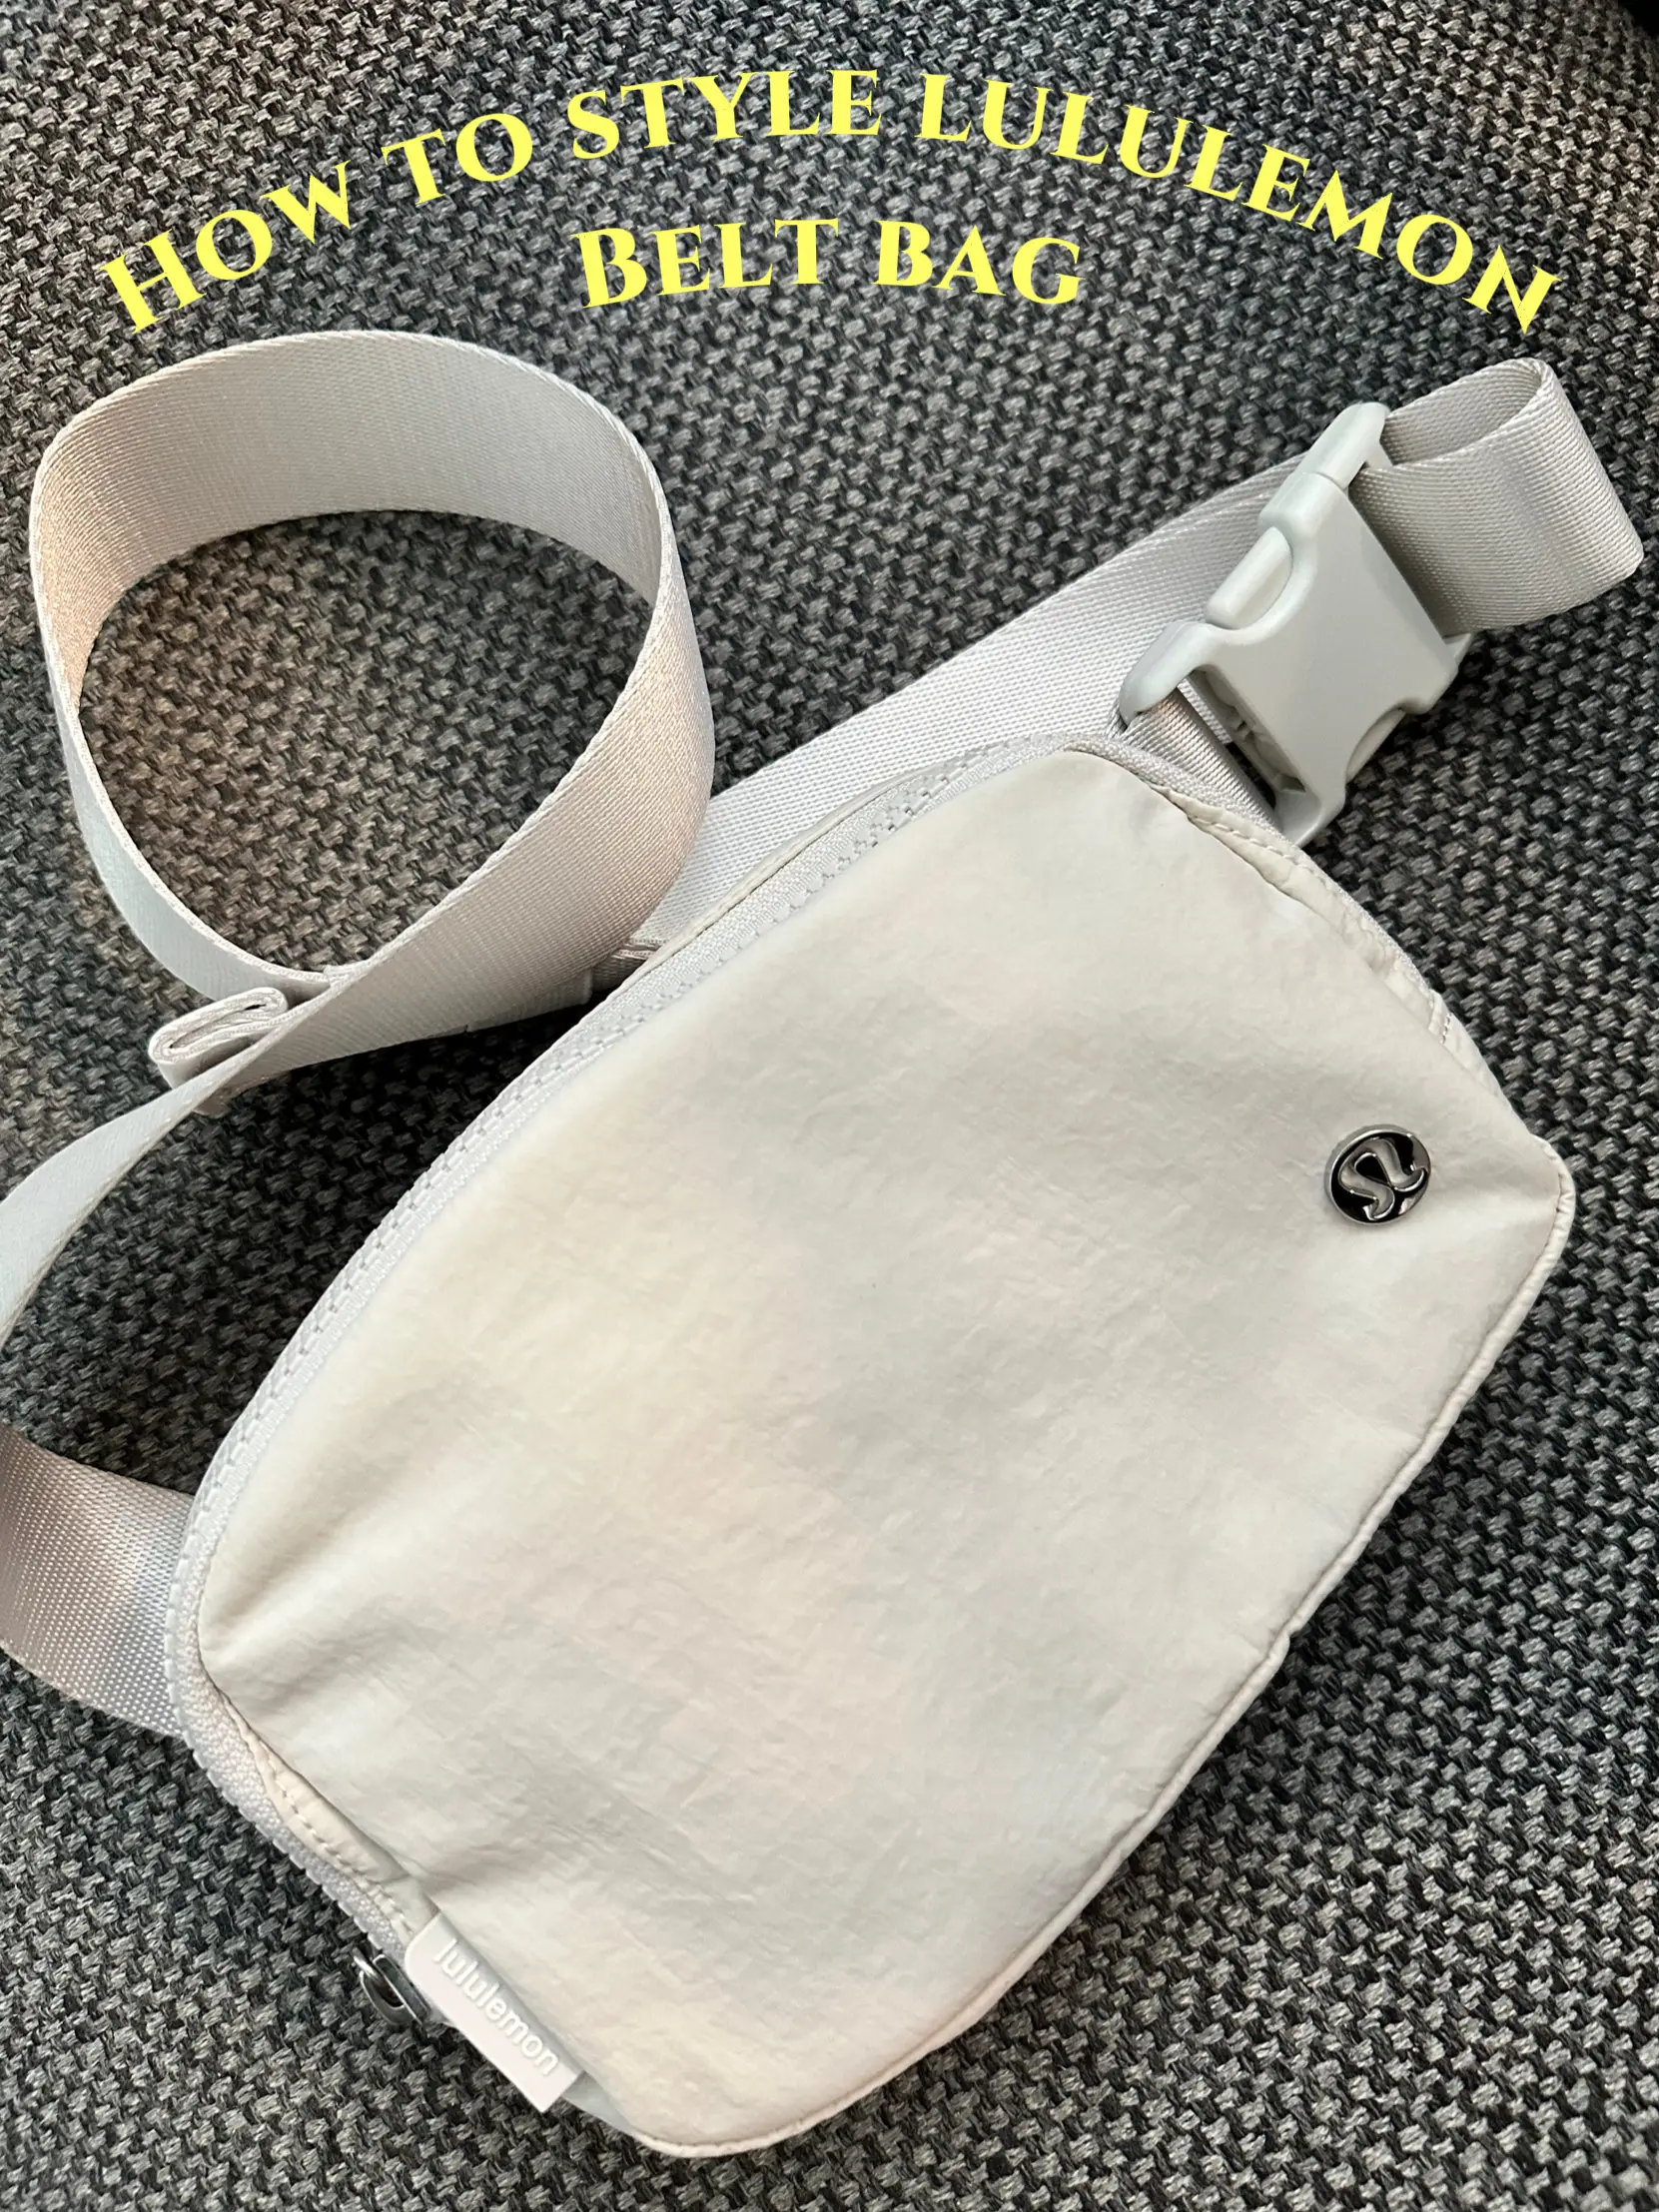 The Lululemon Belt Bag Was the Perfect Accessory for My Two-Week